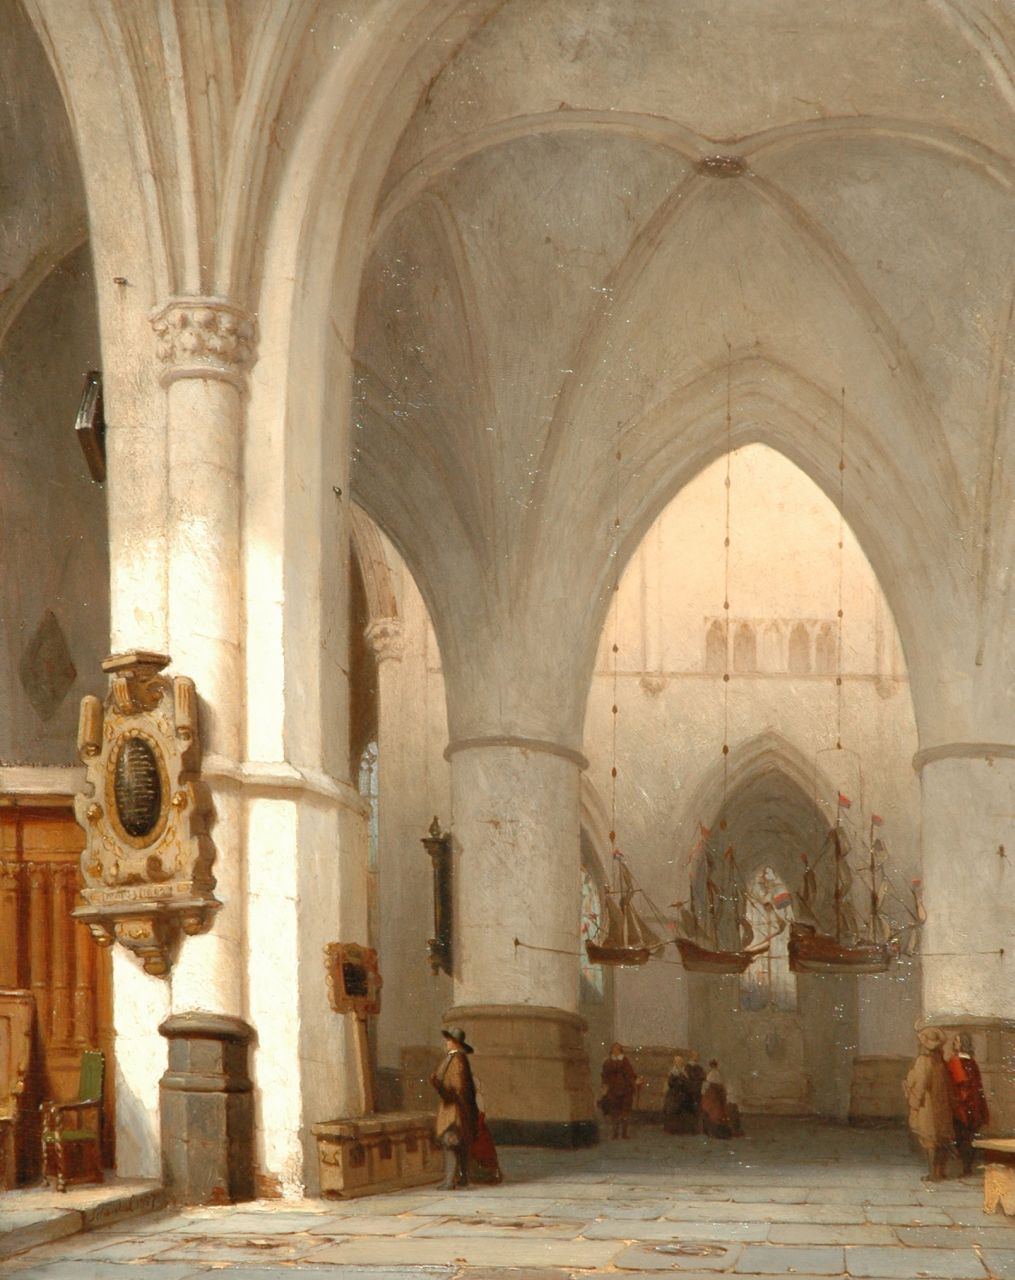 Schenkel J.J.  | Jan Jacob Schenkel, The interior of the St. Bavo church in Haarlem, oil on panel 45.1 x 35.9 cm, signed l.l. and dated 1857